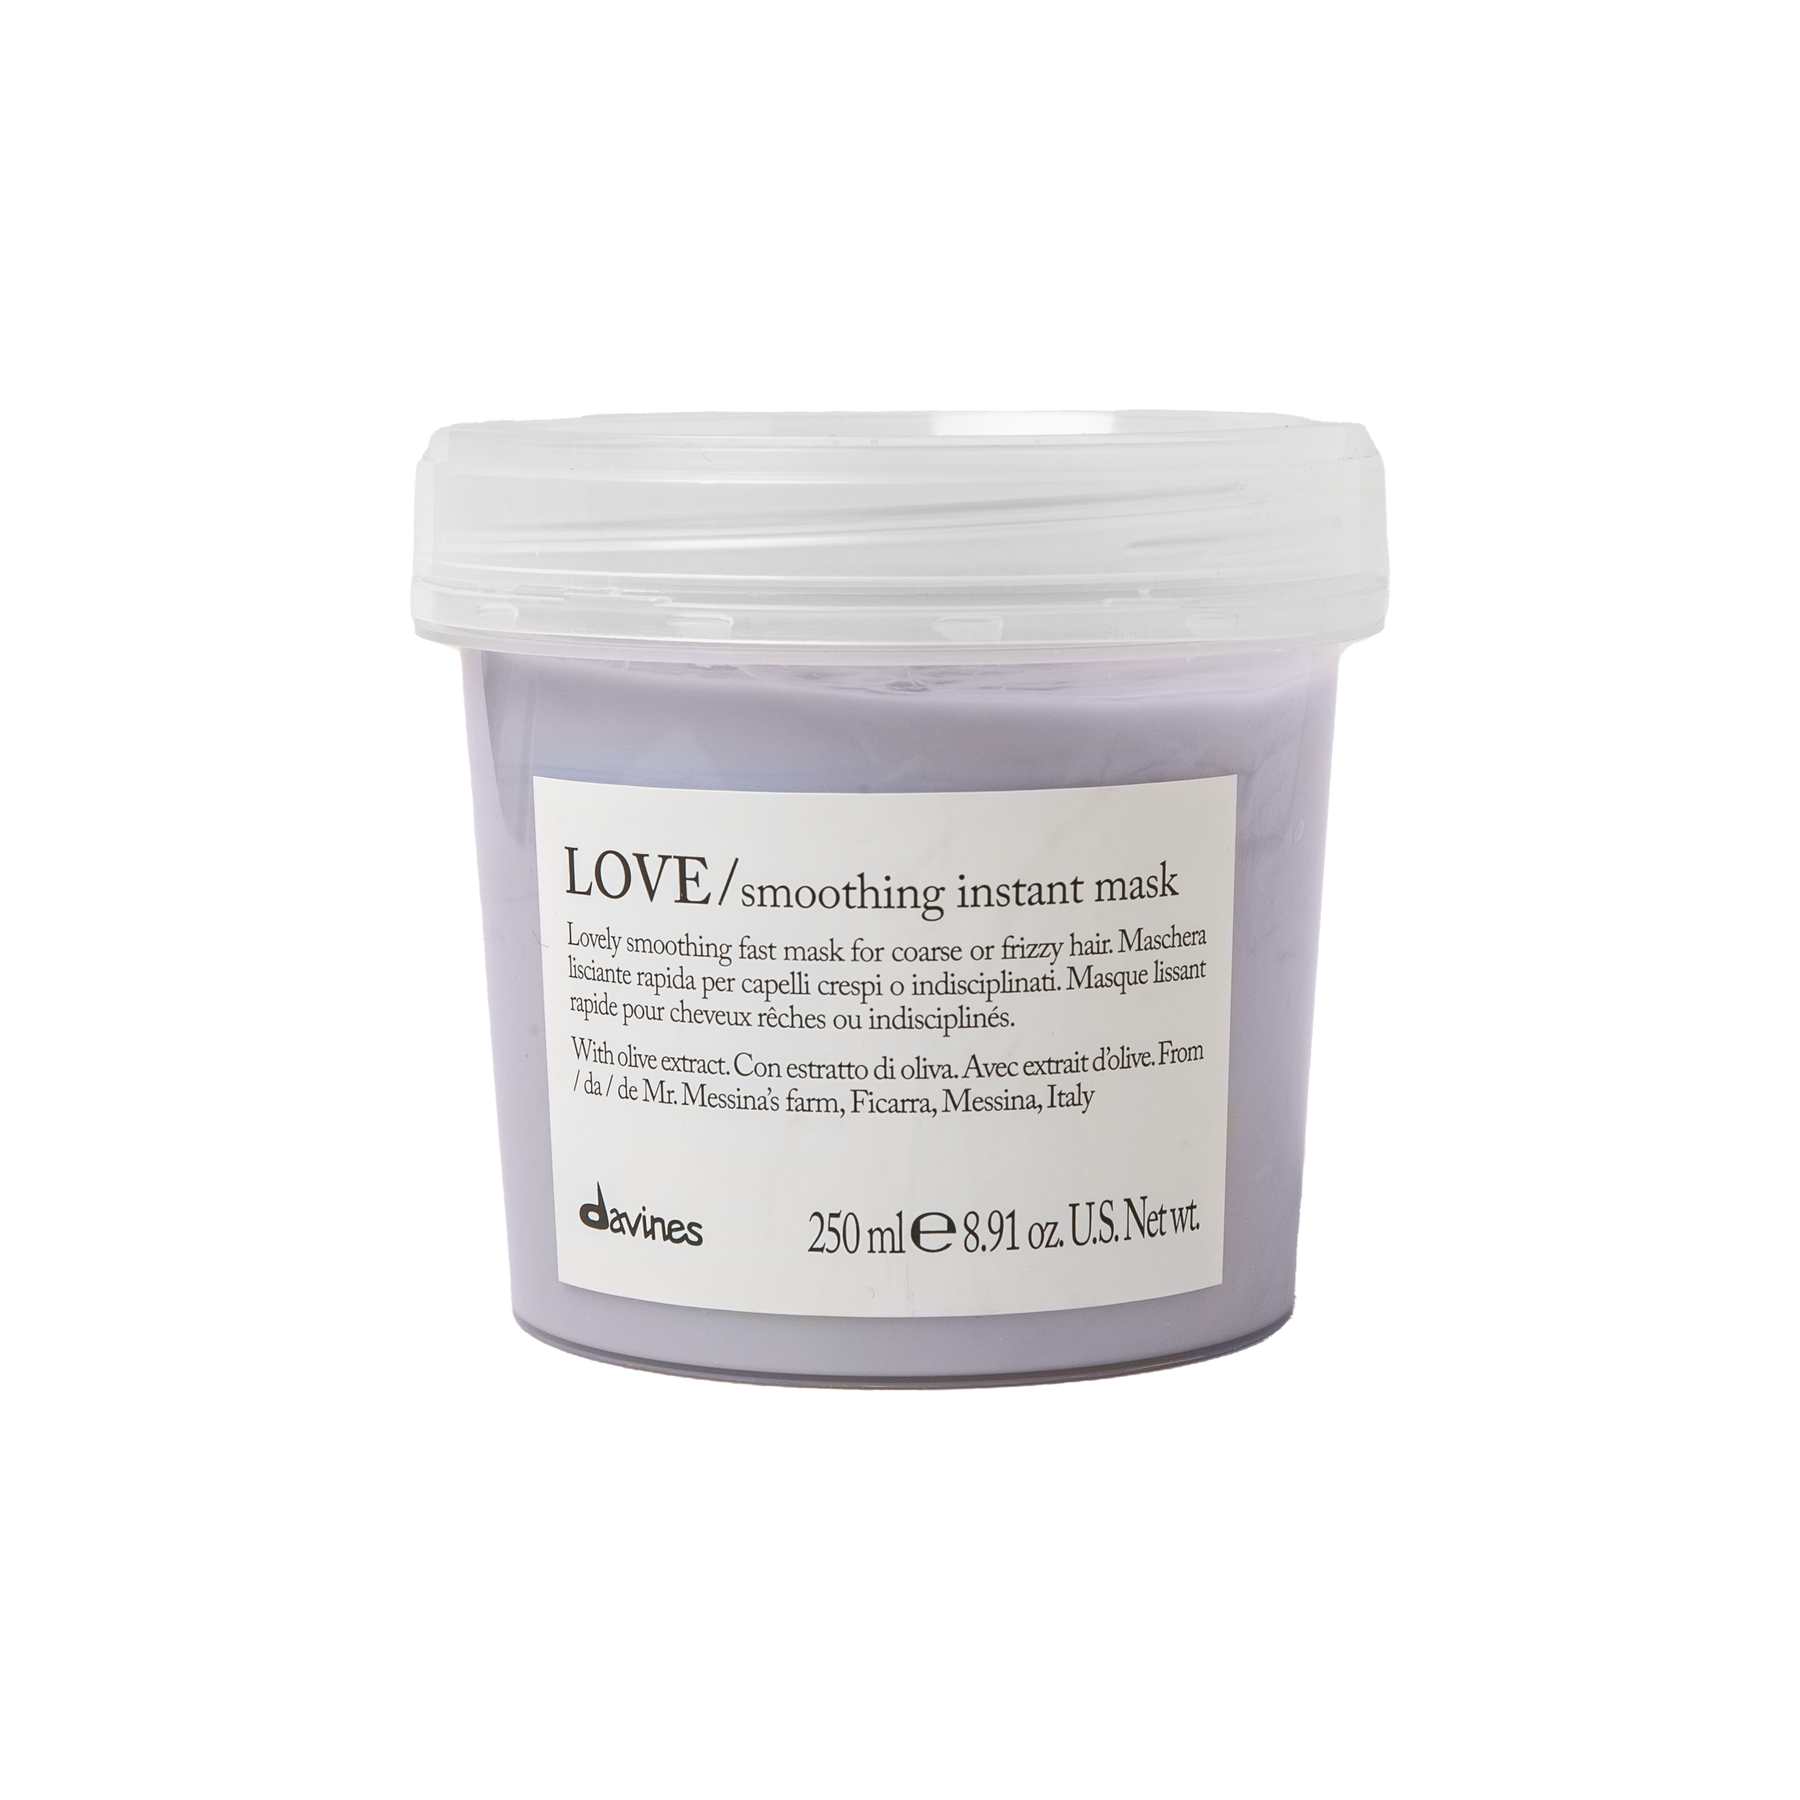 LOVE smoothing instant mask